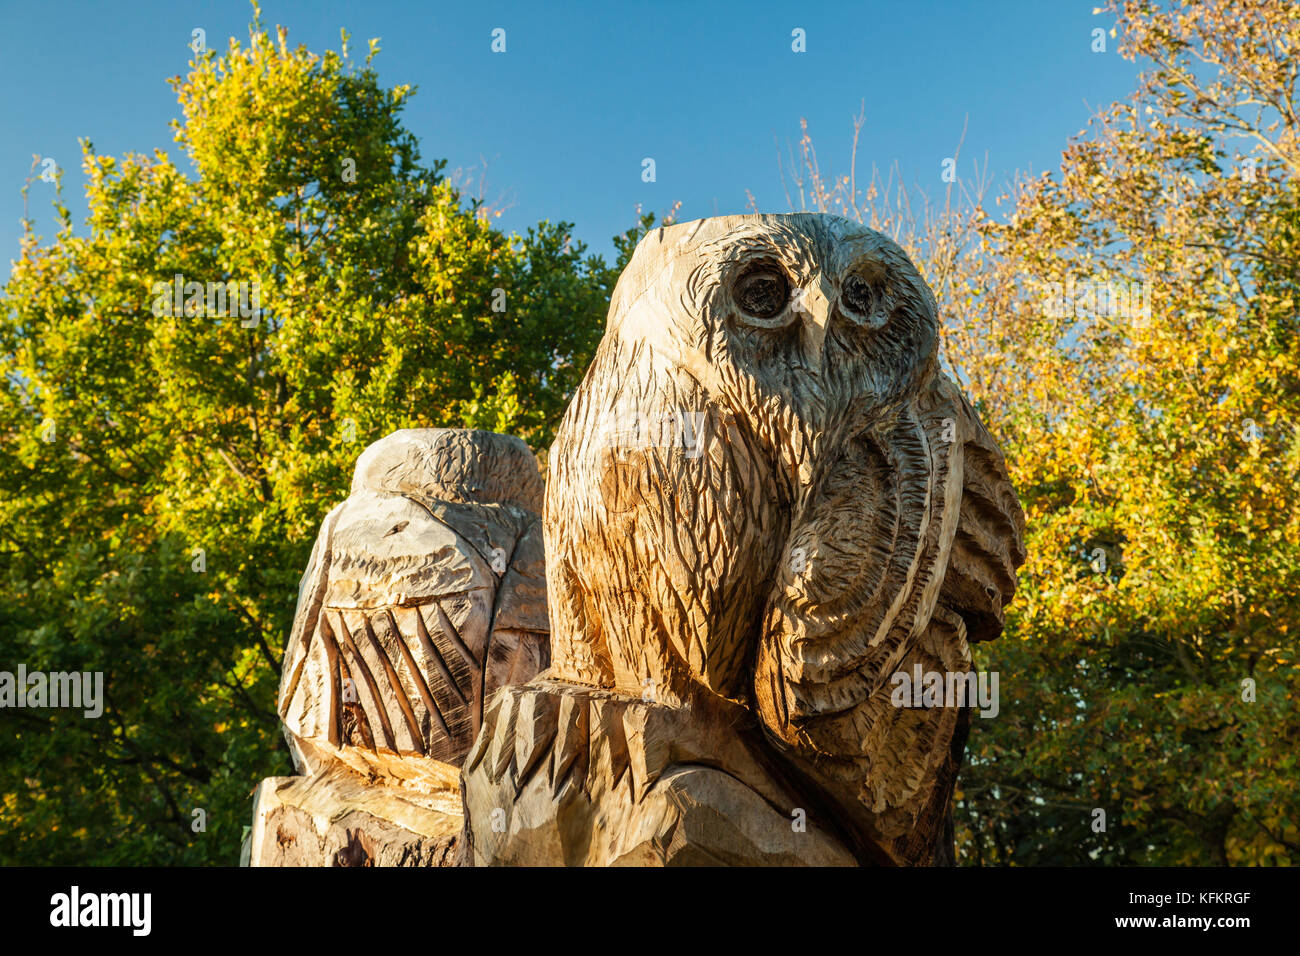 Carved wooden owls in Hurstpierpoint, West Sussex, England. Stock Photo